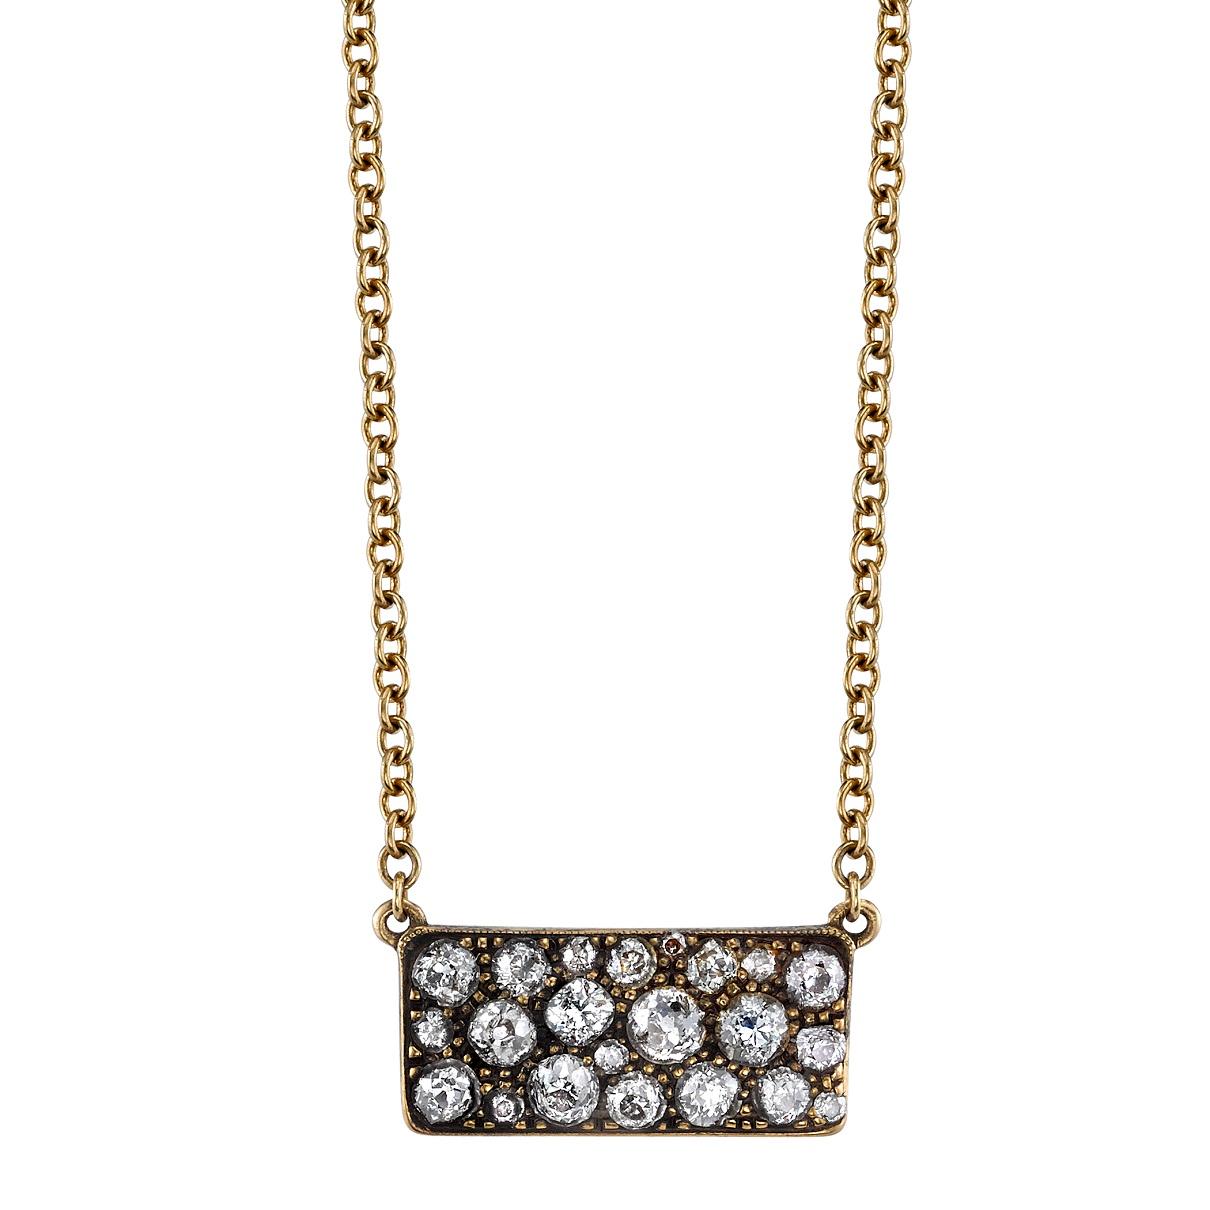 Approximately 1.05ctw varying old cut and round brilliant cut diamonds in a handcrafted oxidized or polished 18k yellow gold pendant.  Price may vary according to total diamond weight.  Necklace includes 18